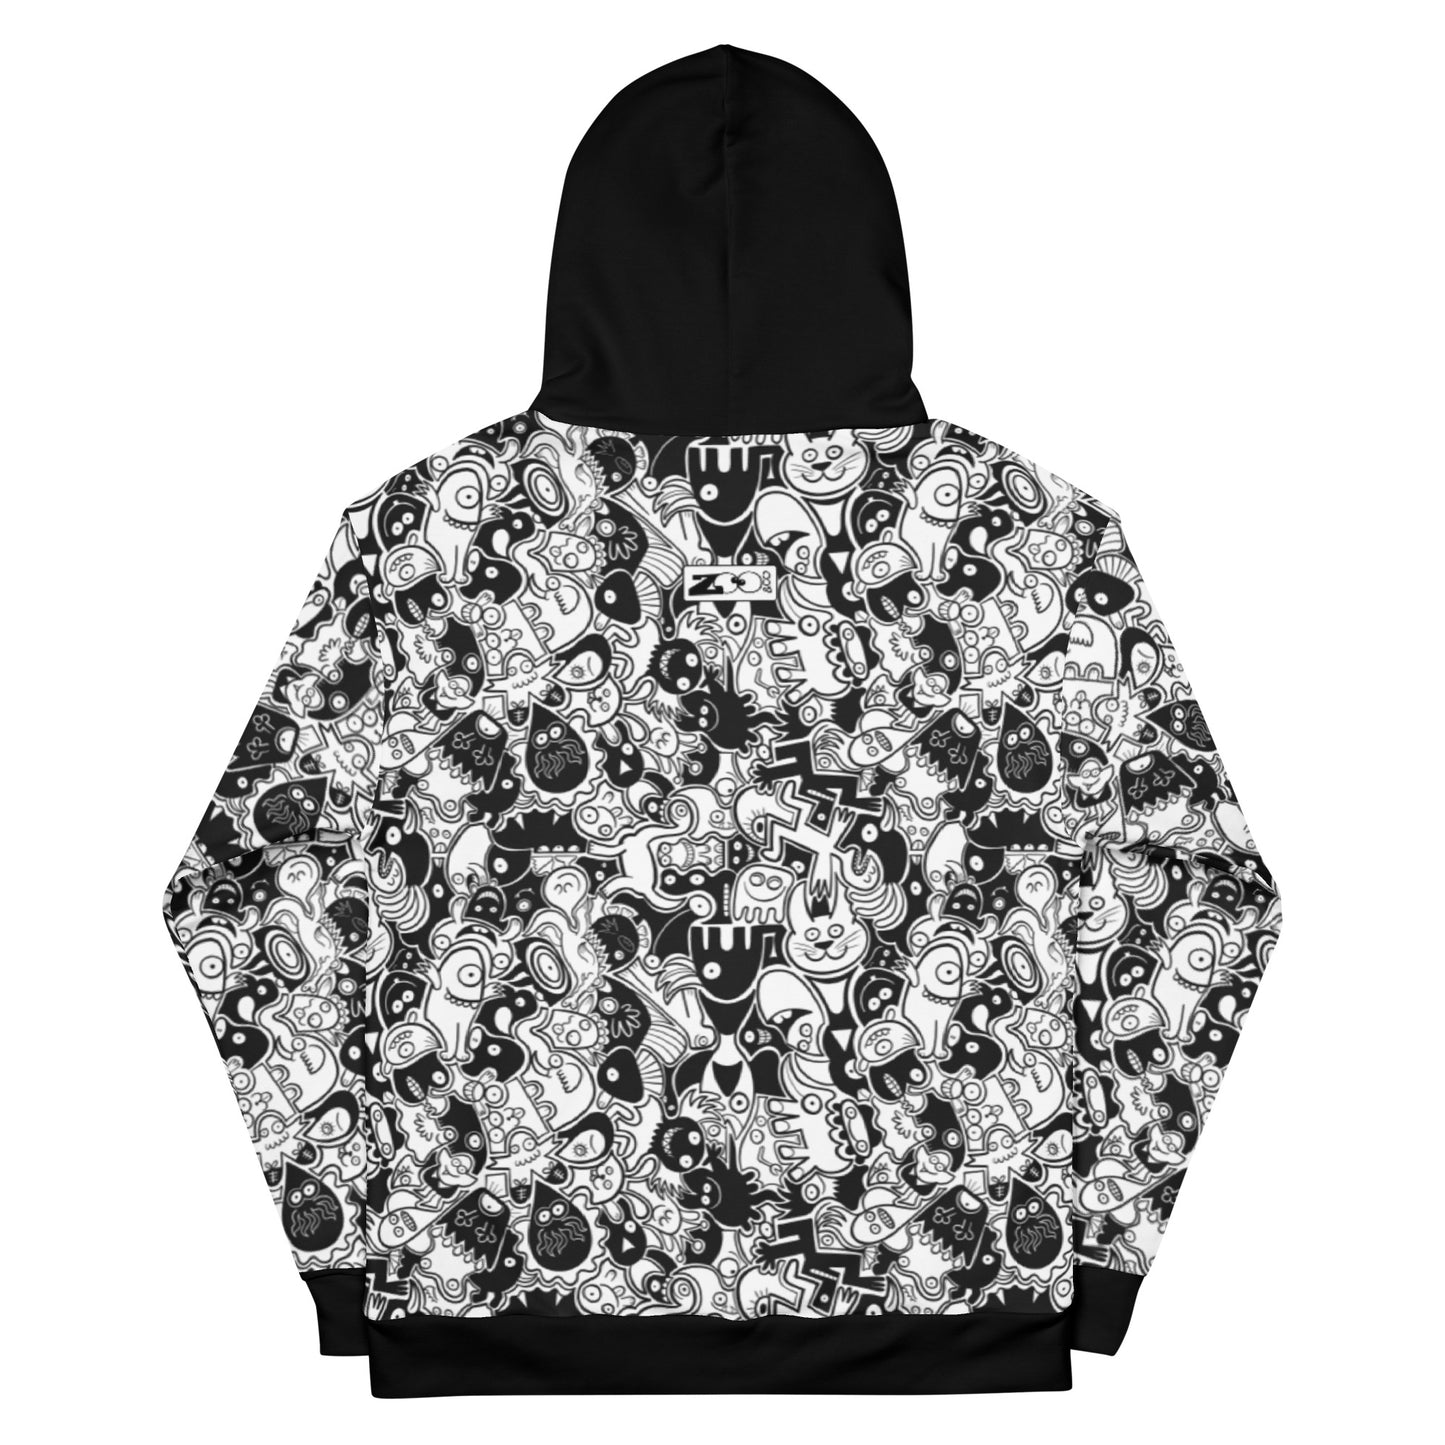 Joyful crowd of black and white doodle creatures Unisex Hoodie. Back view